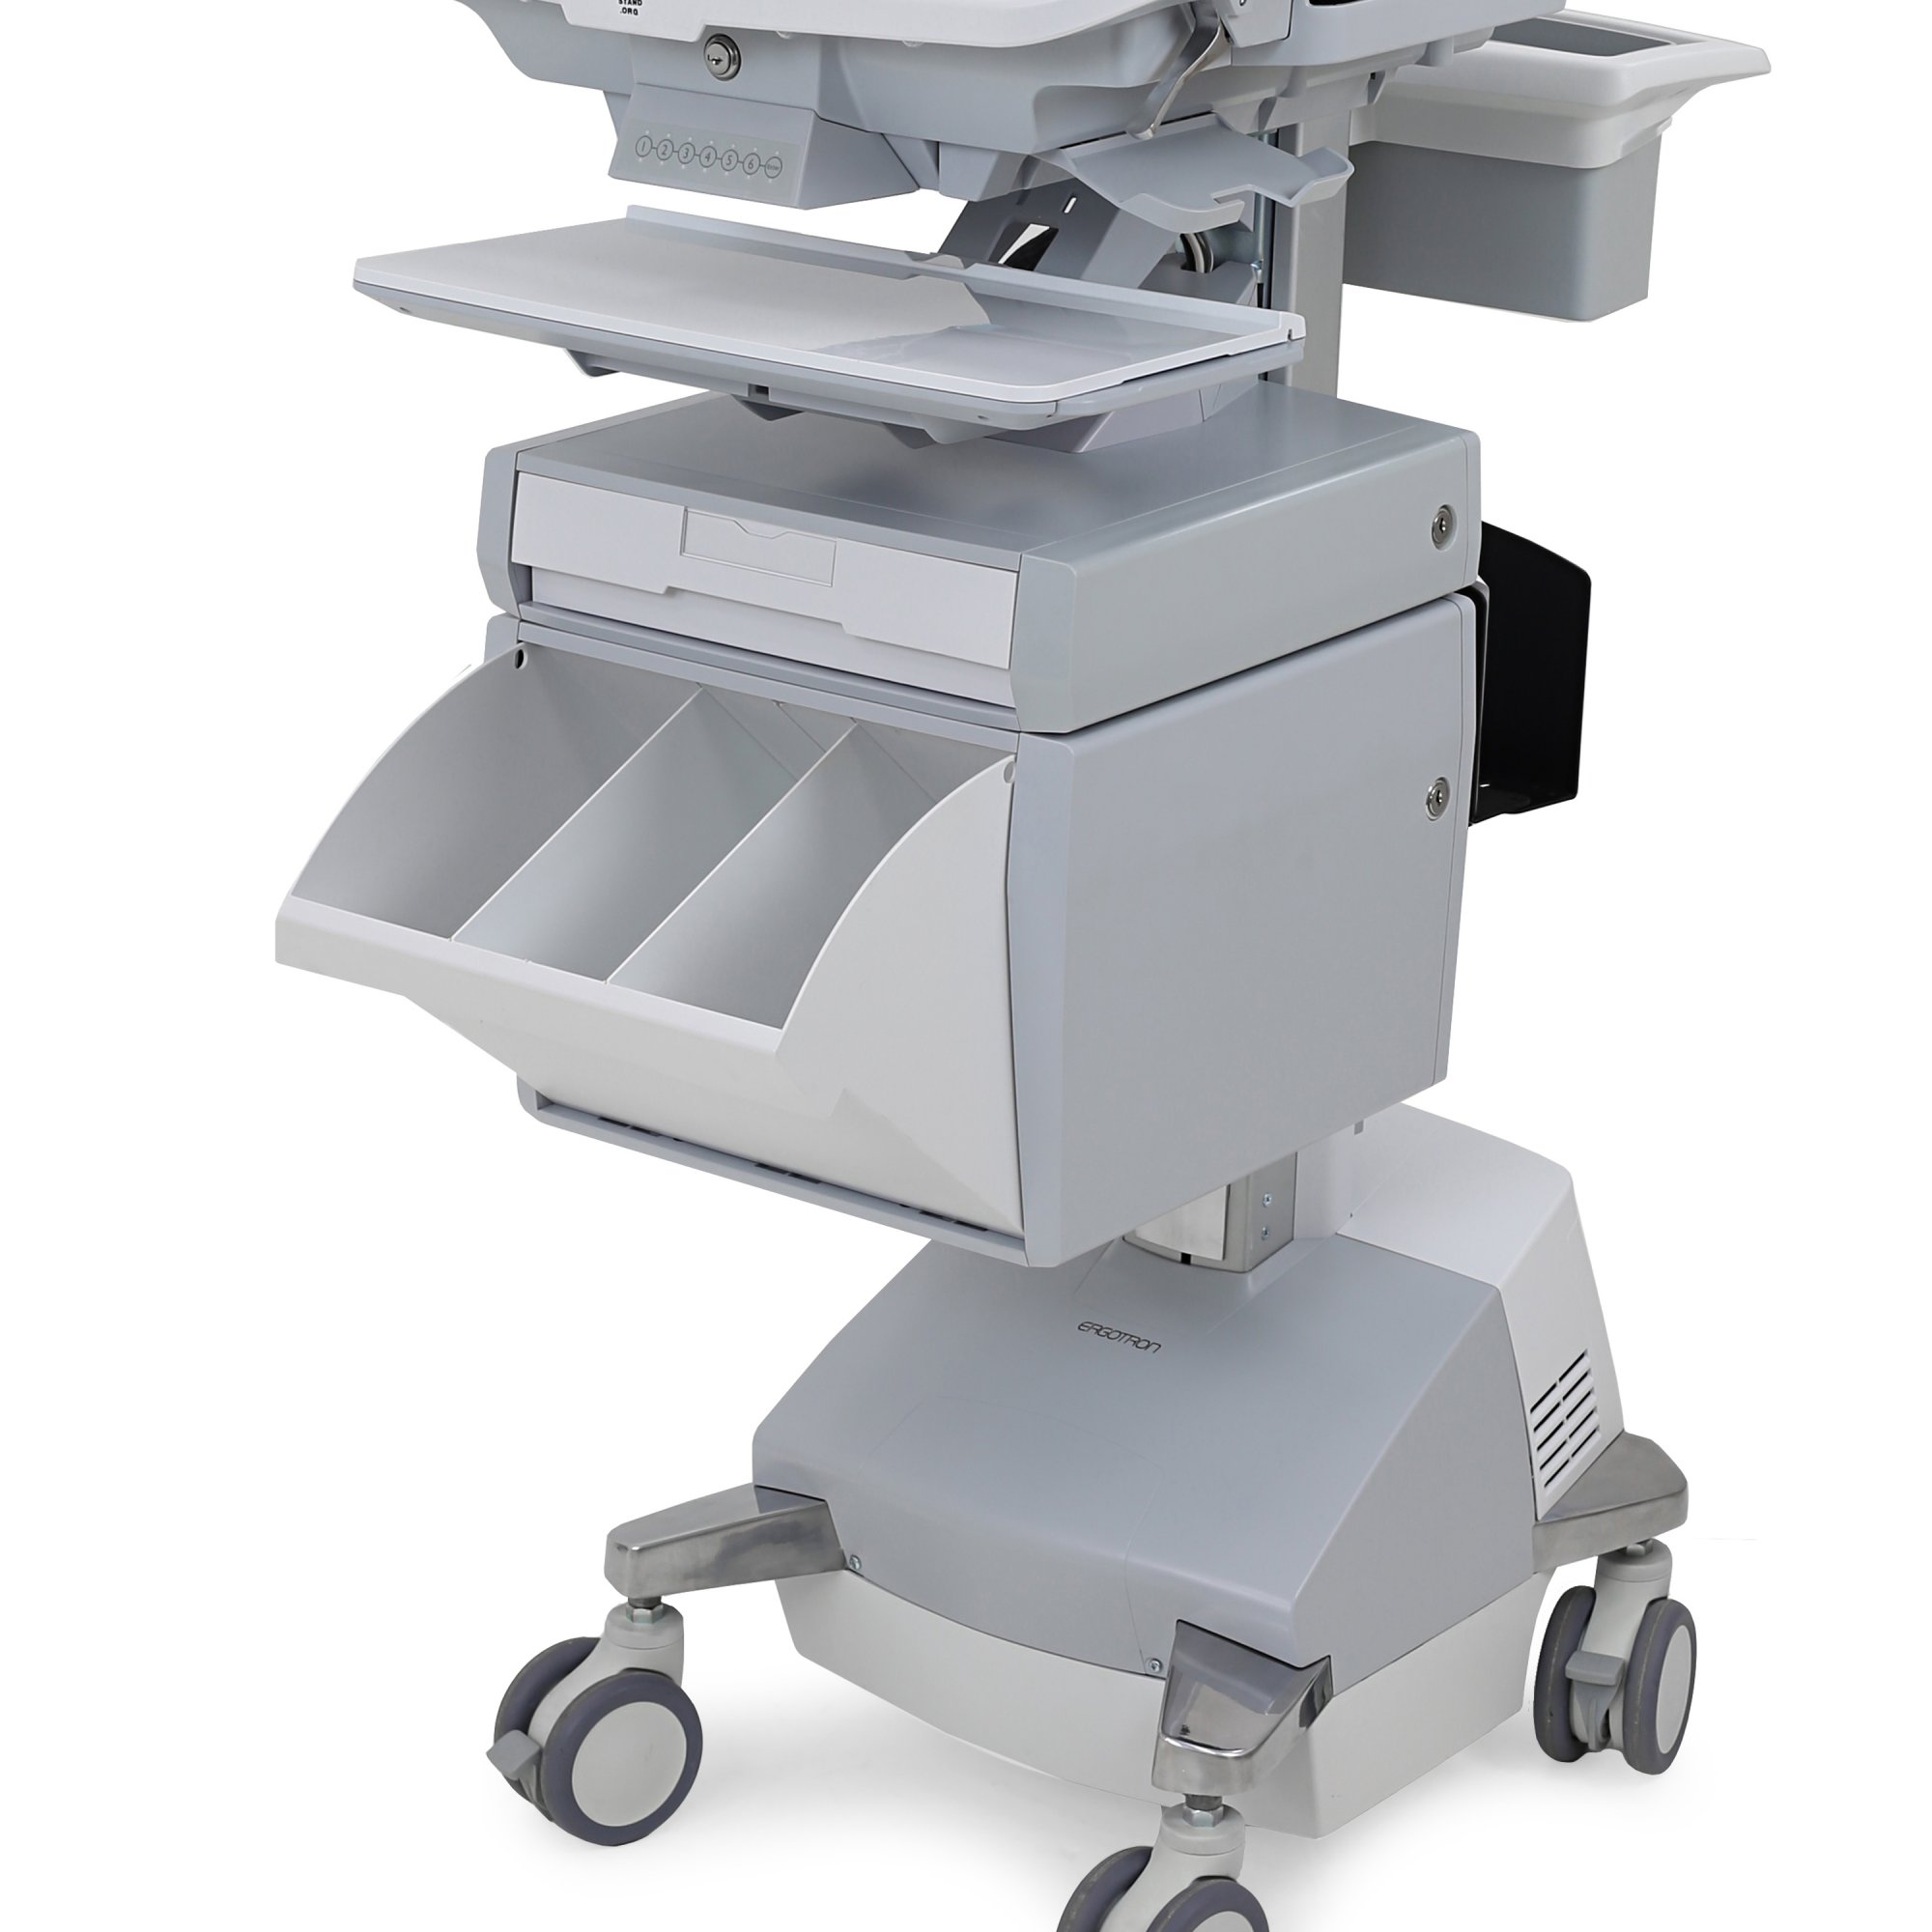 Ergotron Telemedicine Cart with Side-by-Side Monitors and Onboard SLA Power